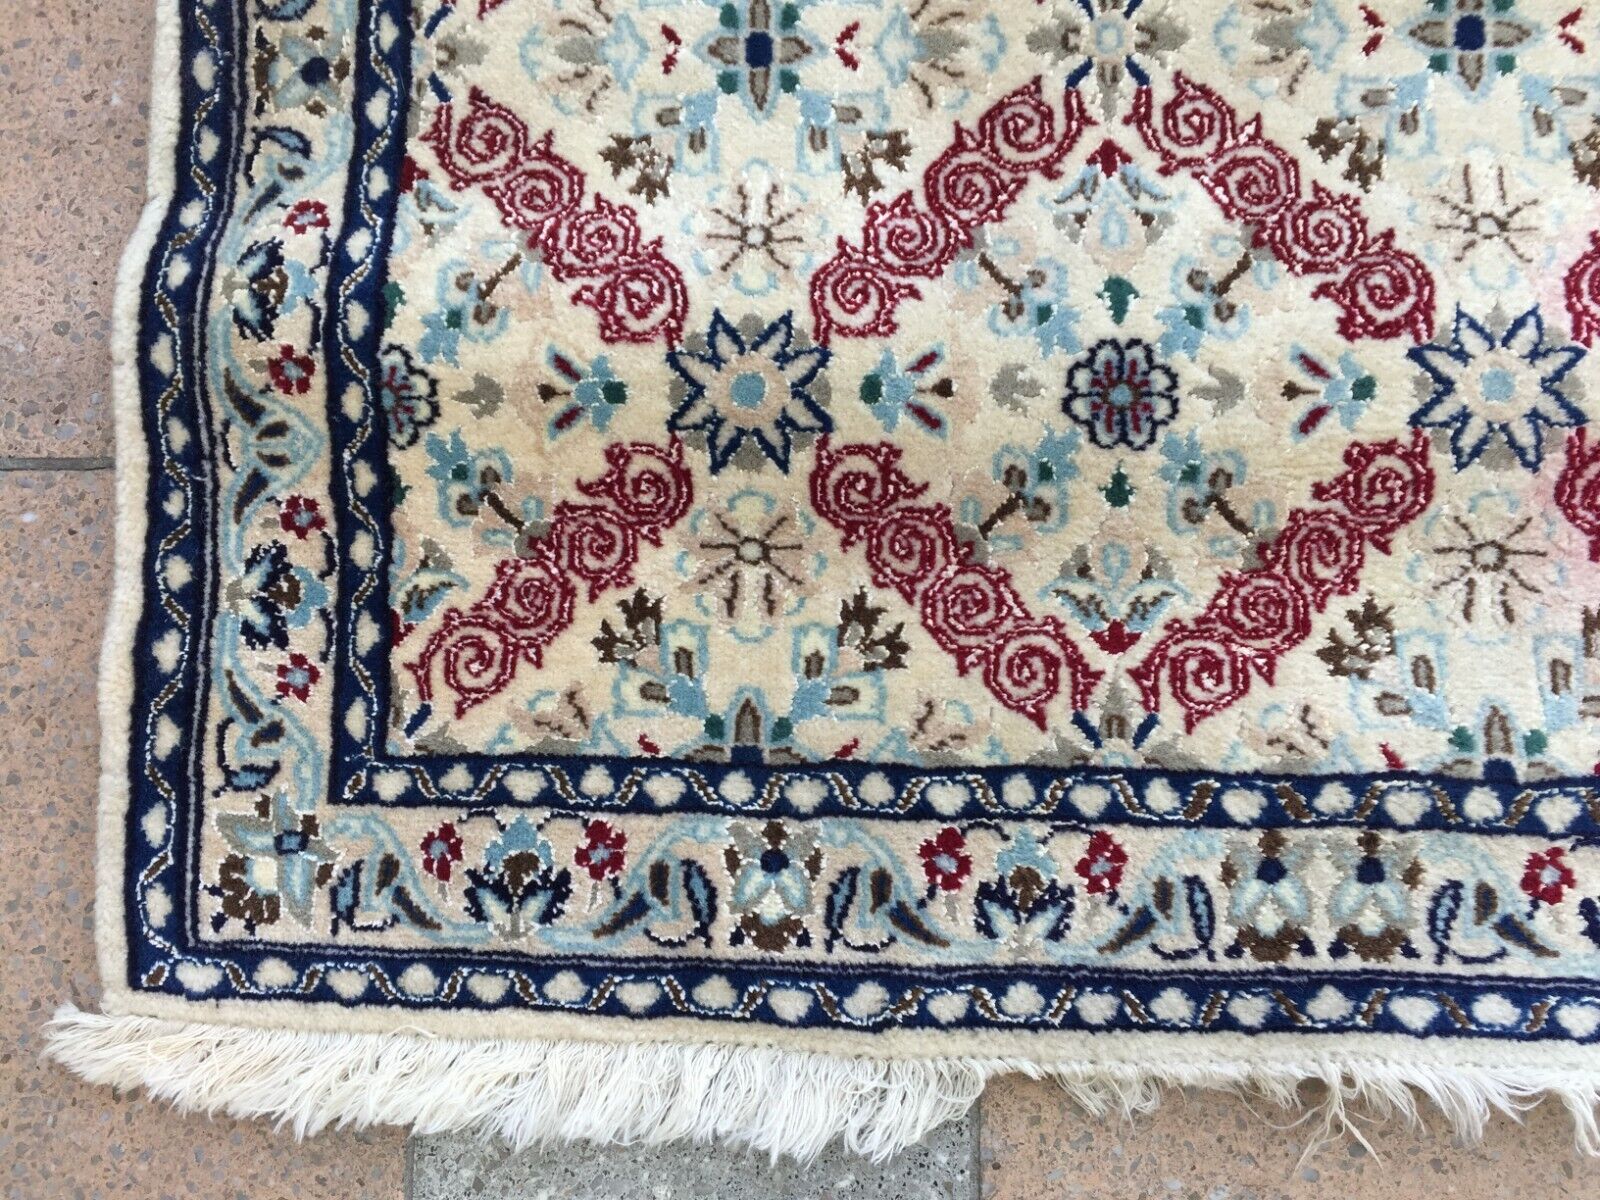 Good Condition Reflecting Quality and Care of Handmade Vintage Nain Rug - 1960s